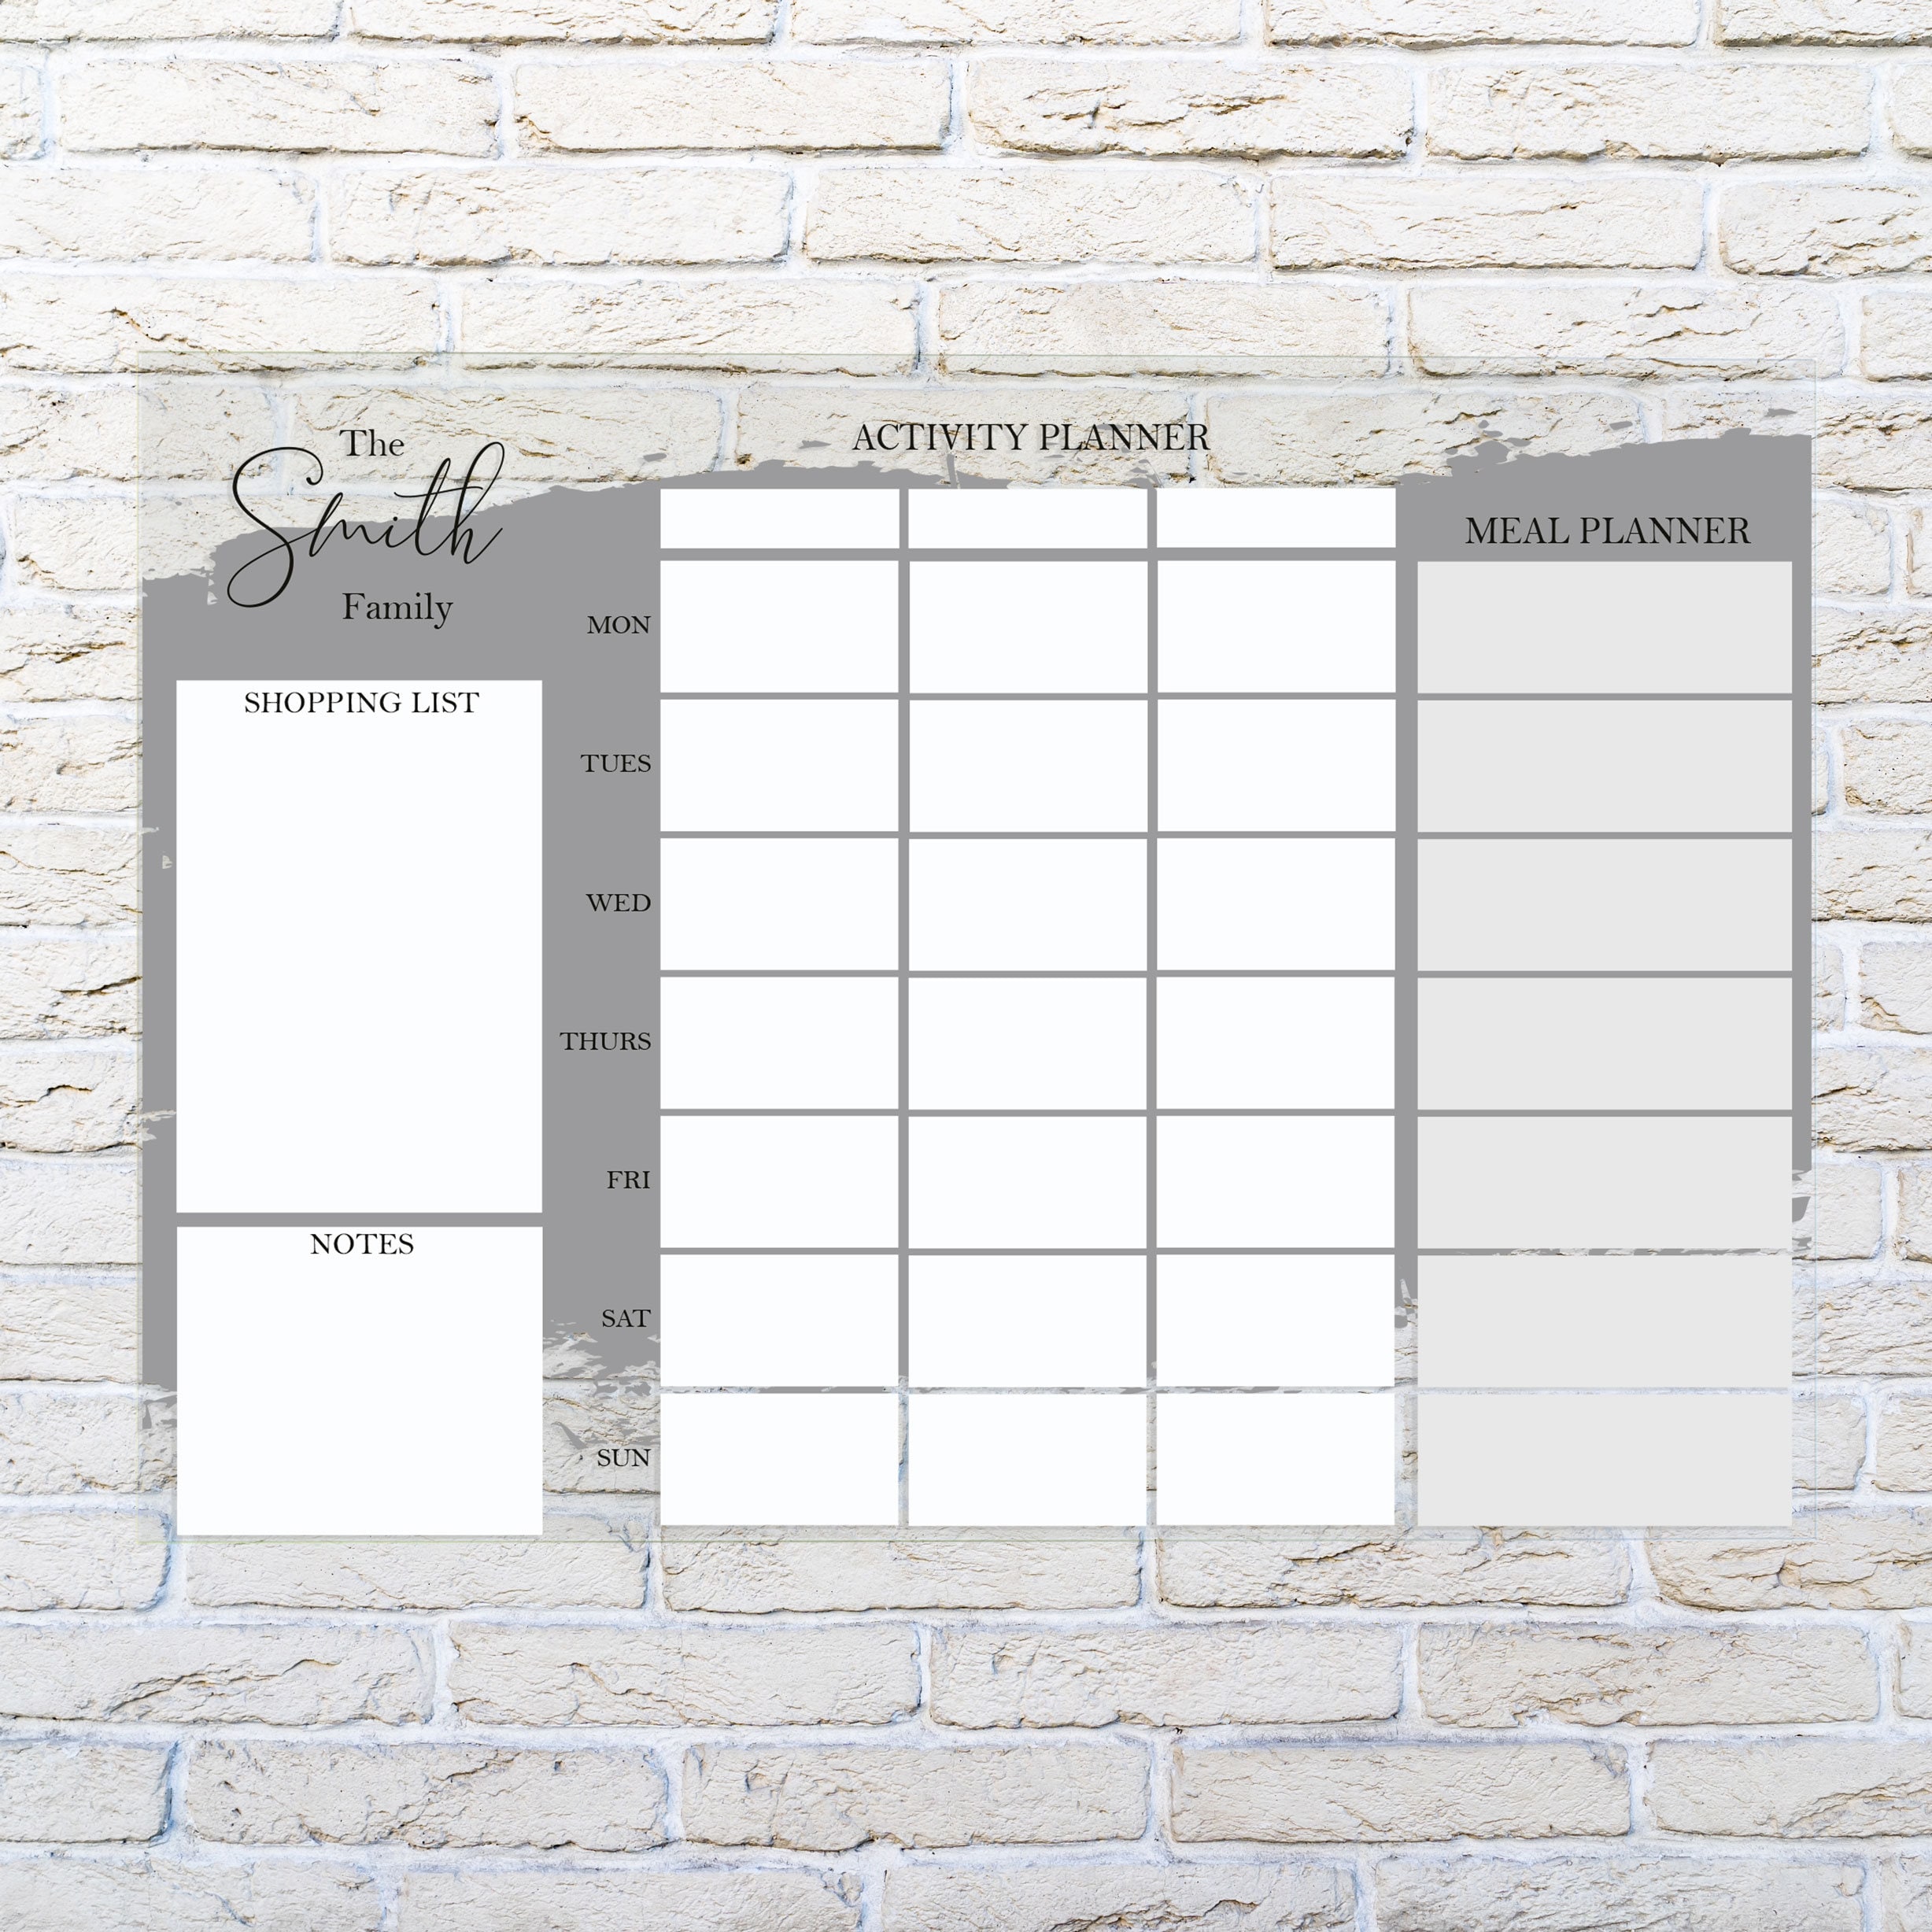 Large Family Weekly Planner Dry Wipe Whiteboard Wall Organiser